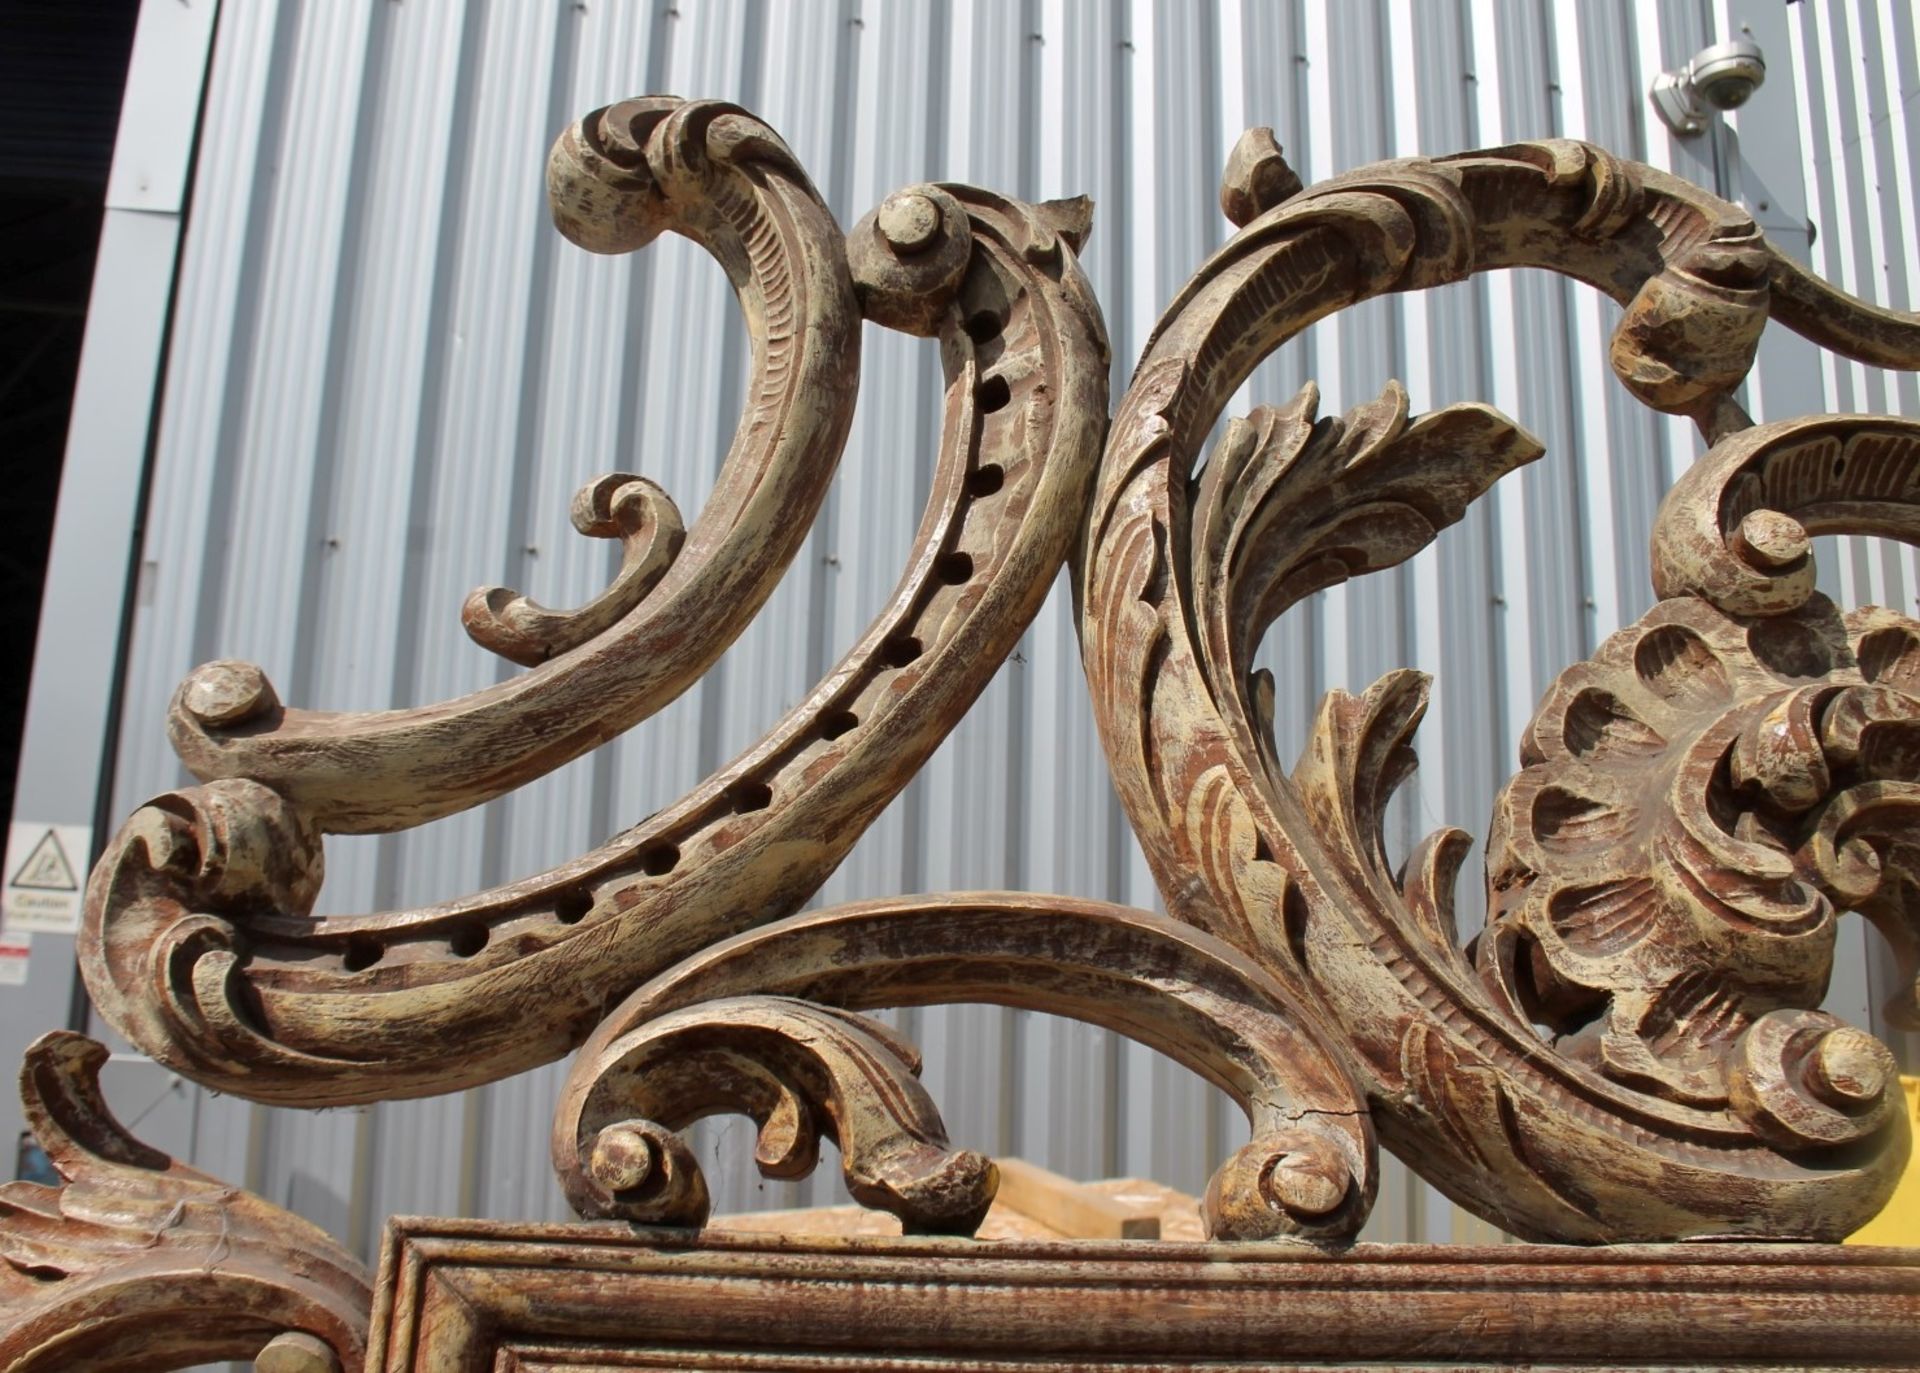 1 x Huge 2-Metre Tall Hand-Carved Gothic Mirror *Condition Report* Dimensions: H200 x W130 x - Image 3 of 9